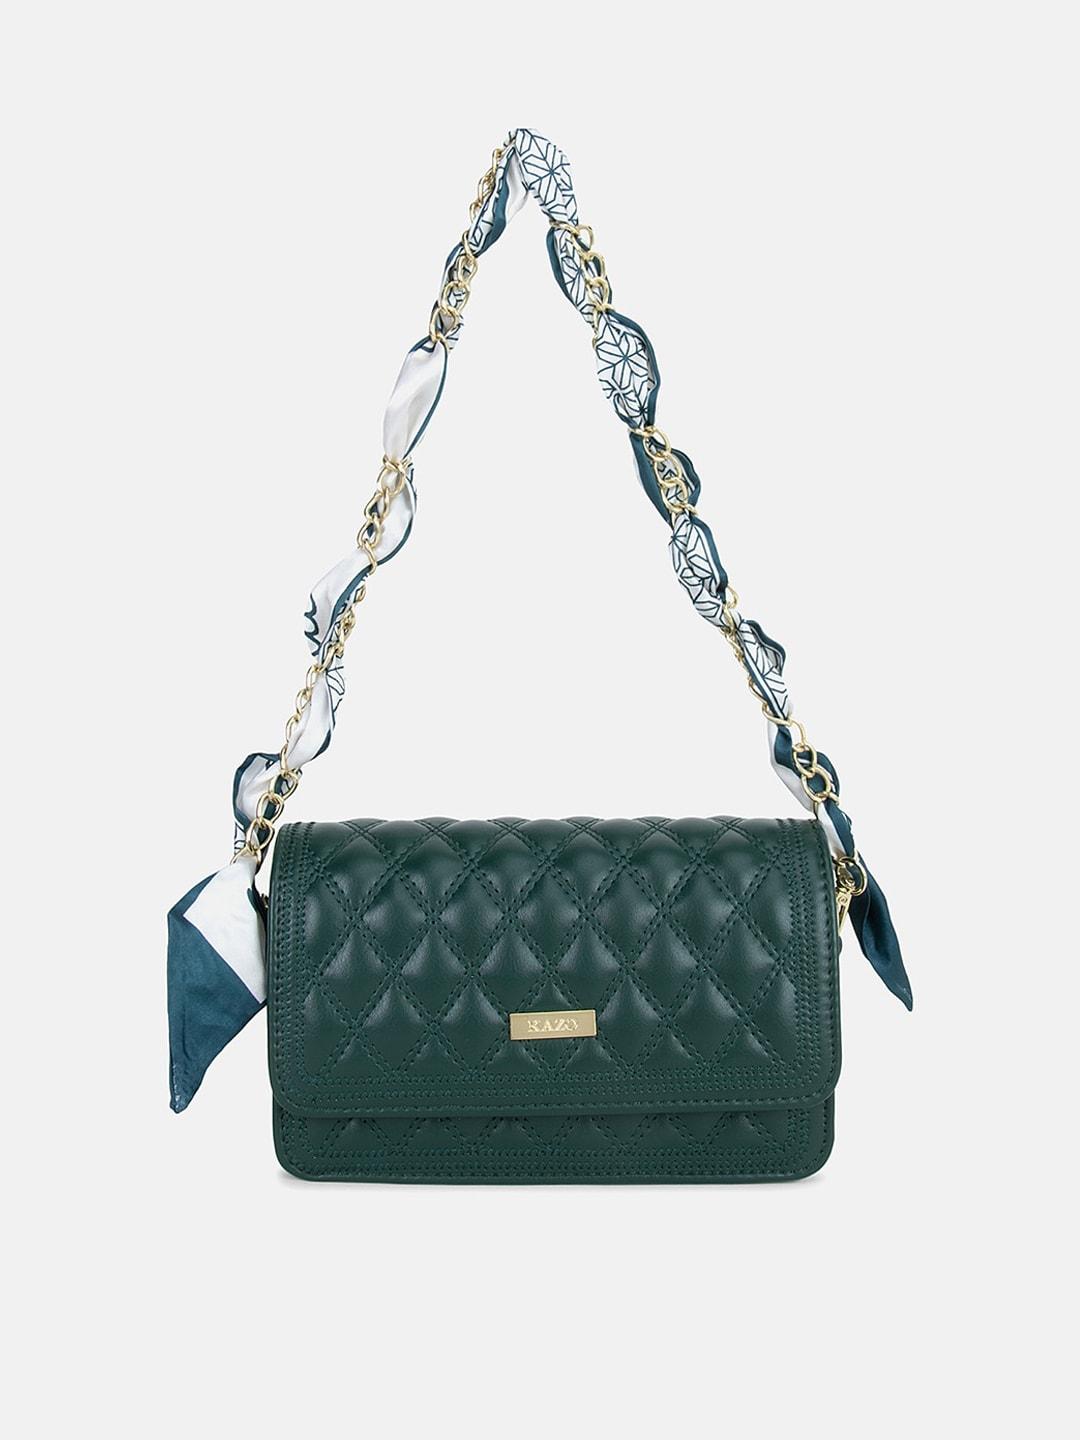 kazo olive green textured pu structured sling bag with quilted